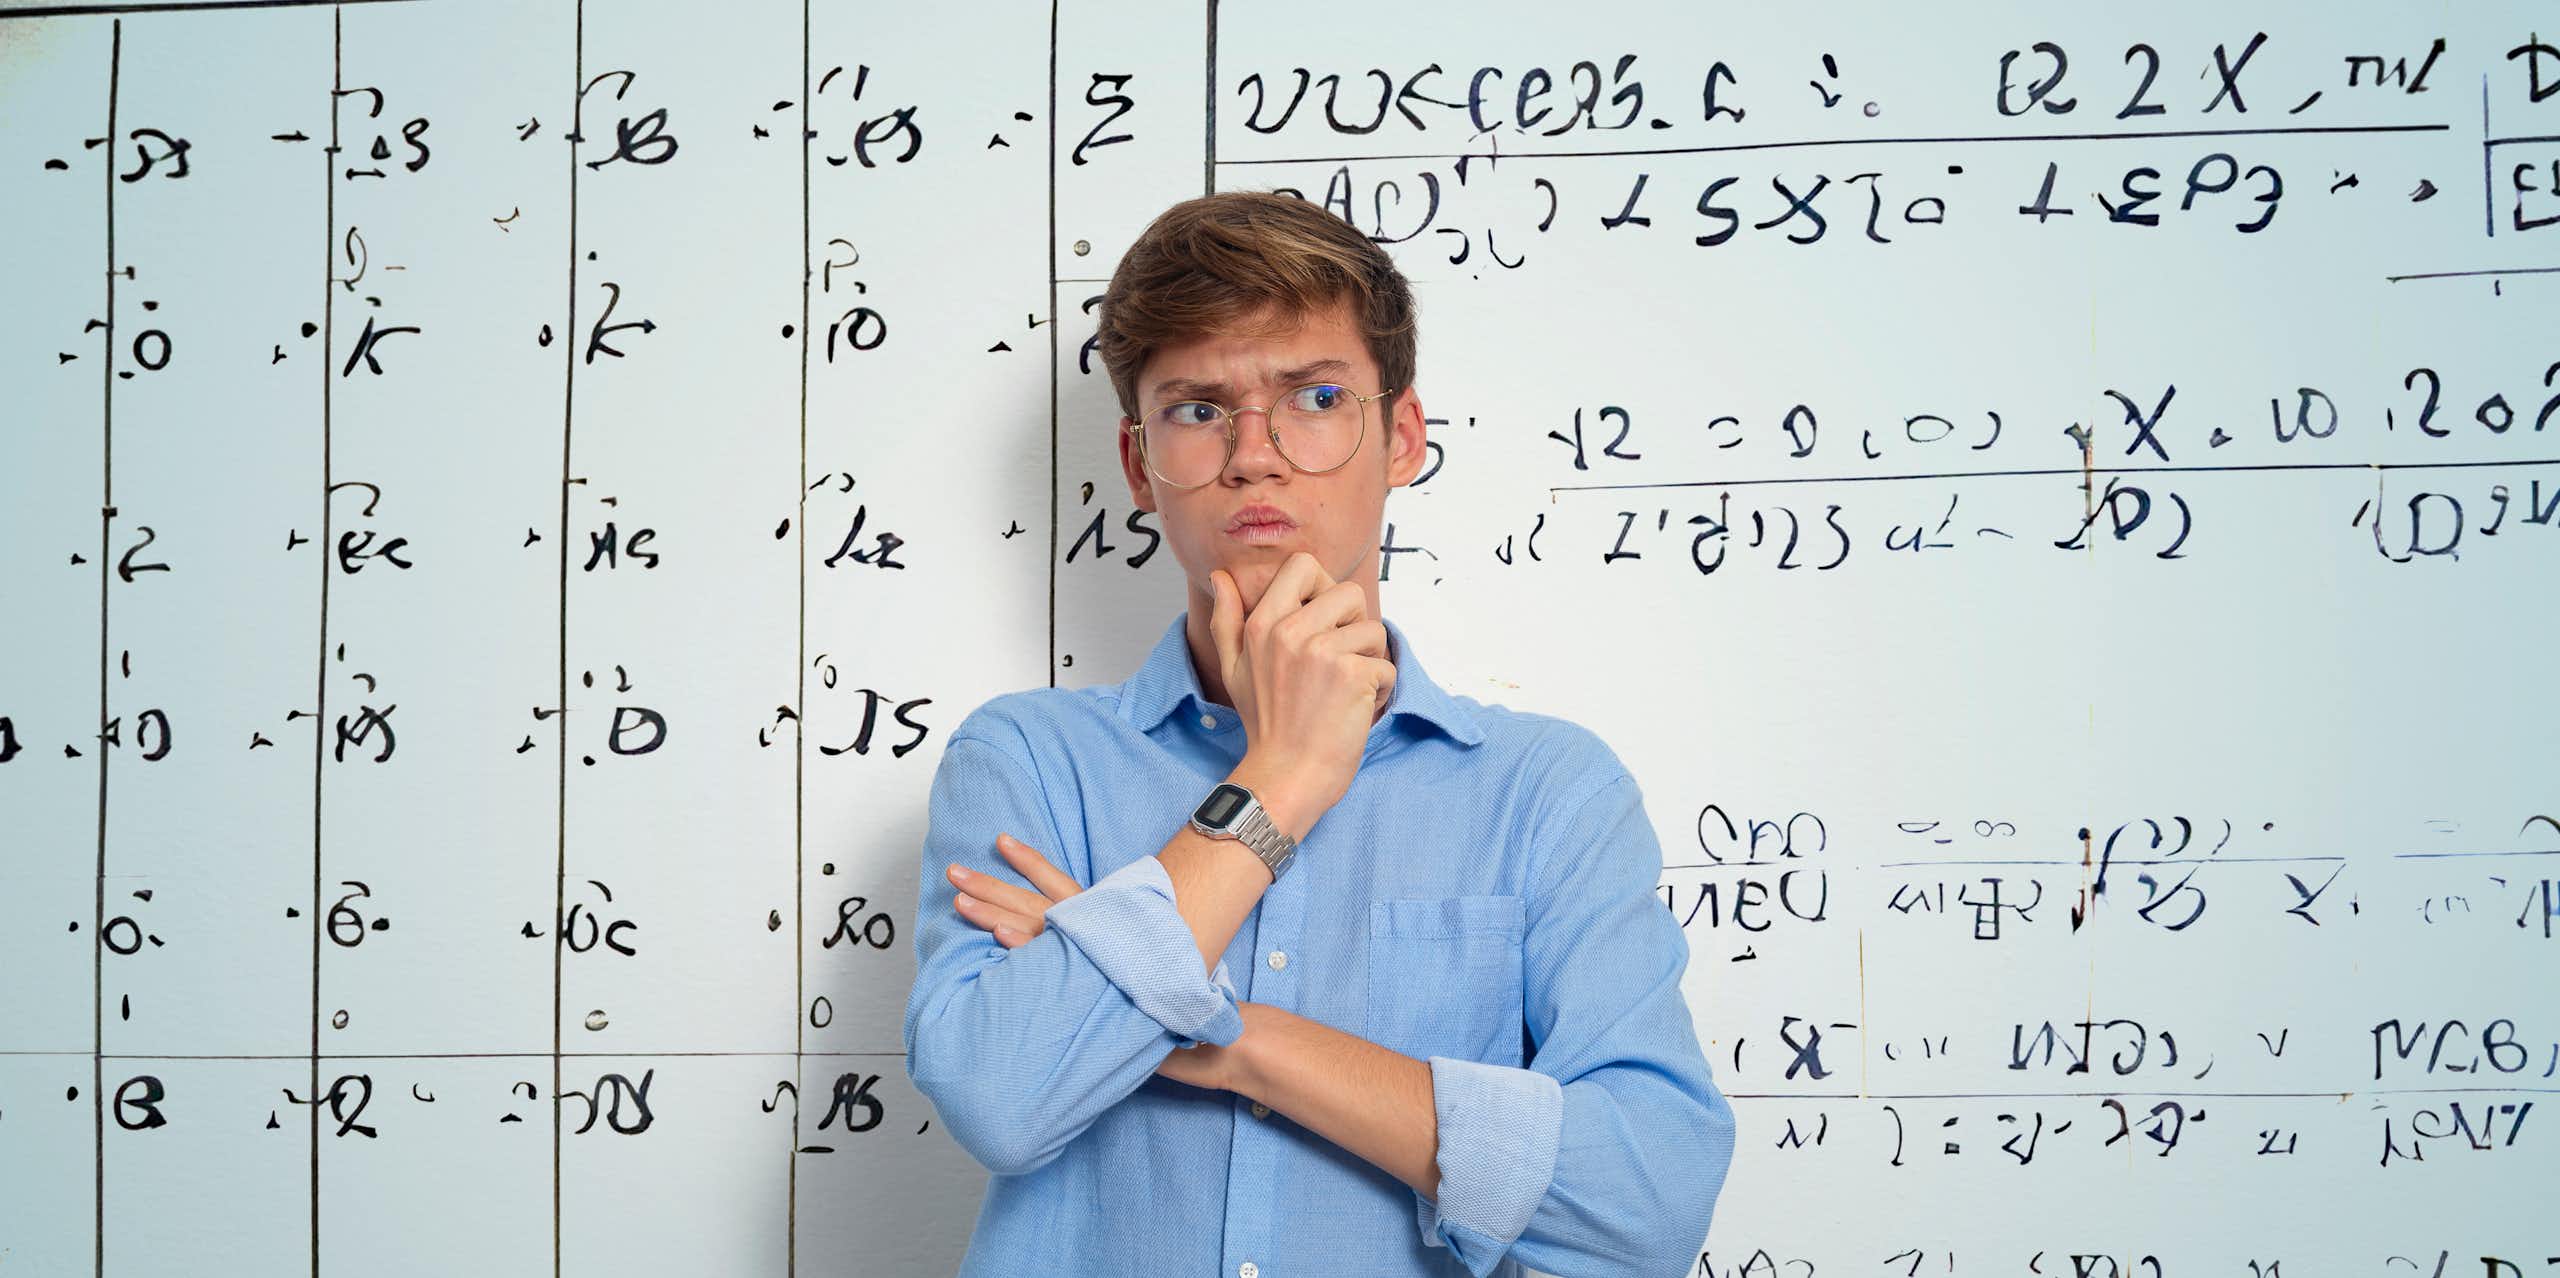 A teenage boy with a quizzical look on his face stands in front of a whiteboard filled with mathematical equations.